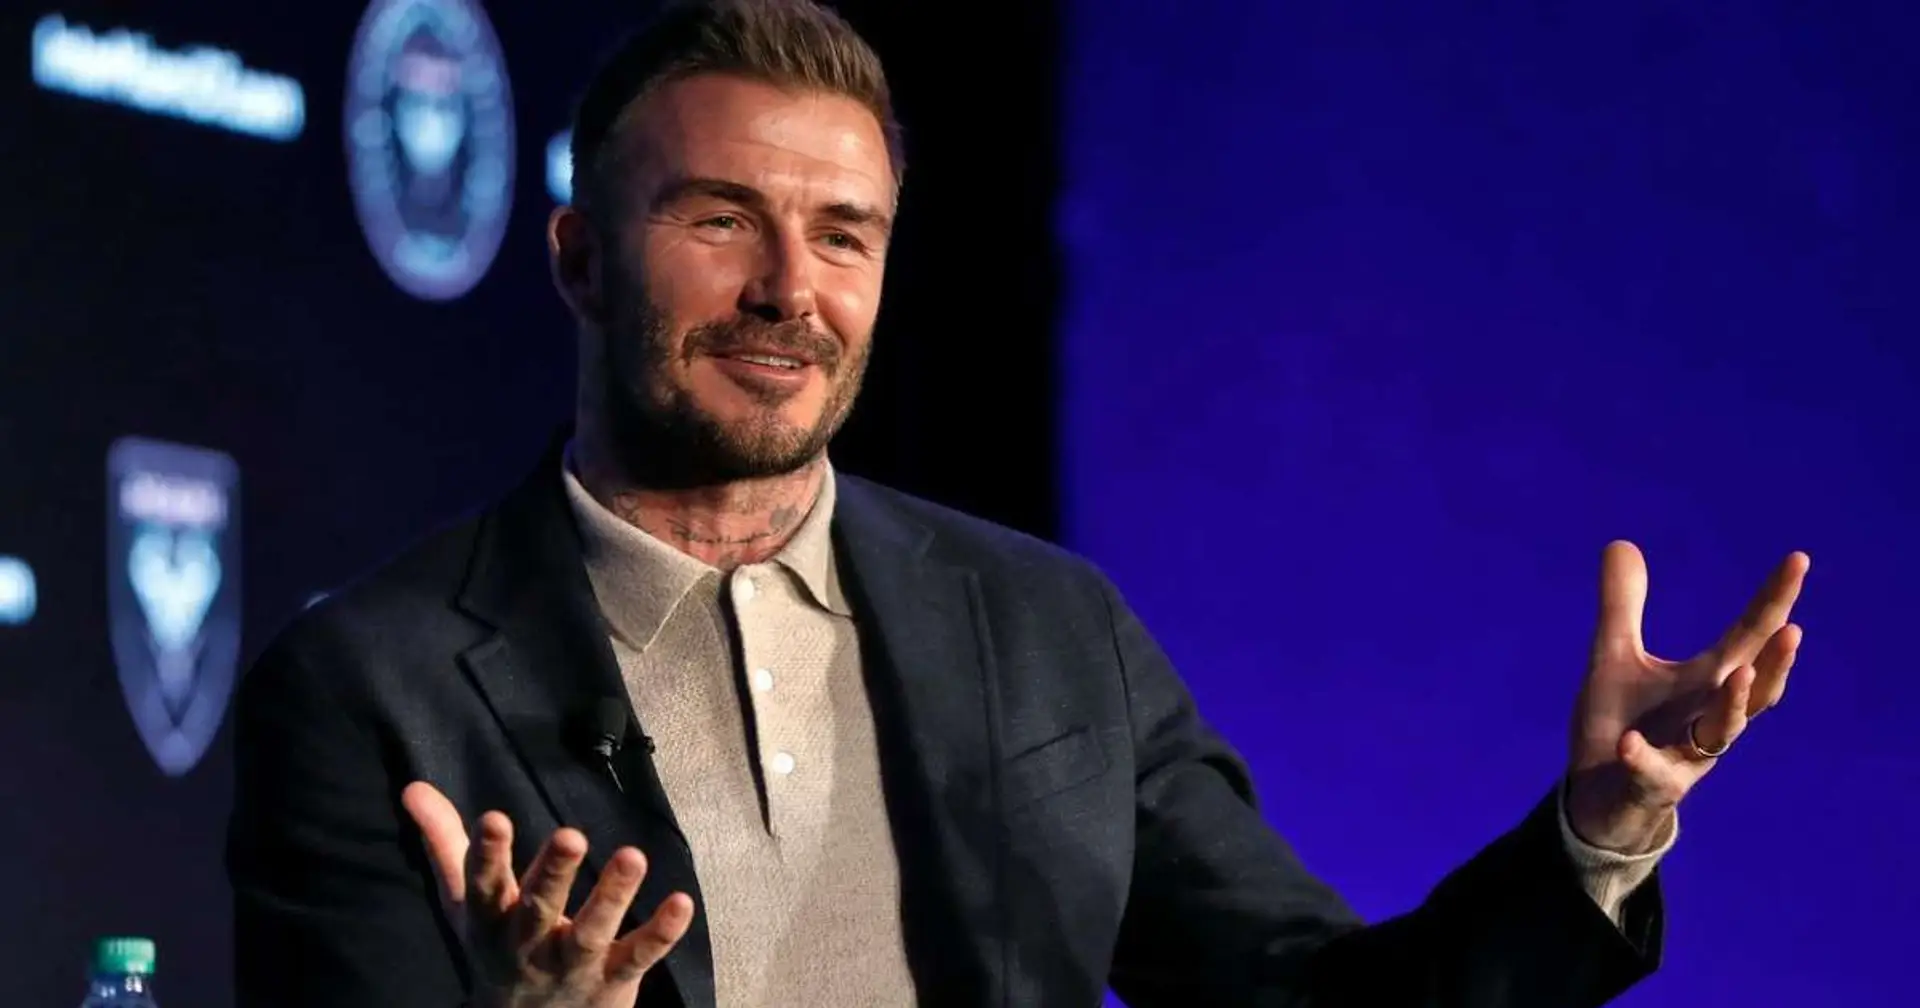 'Man United and Real Madrid weren’t built in a day': David Beckham pleas for patience as Inter Miami create unfortunate record